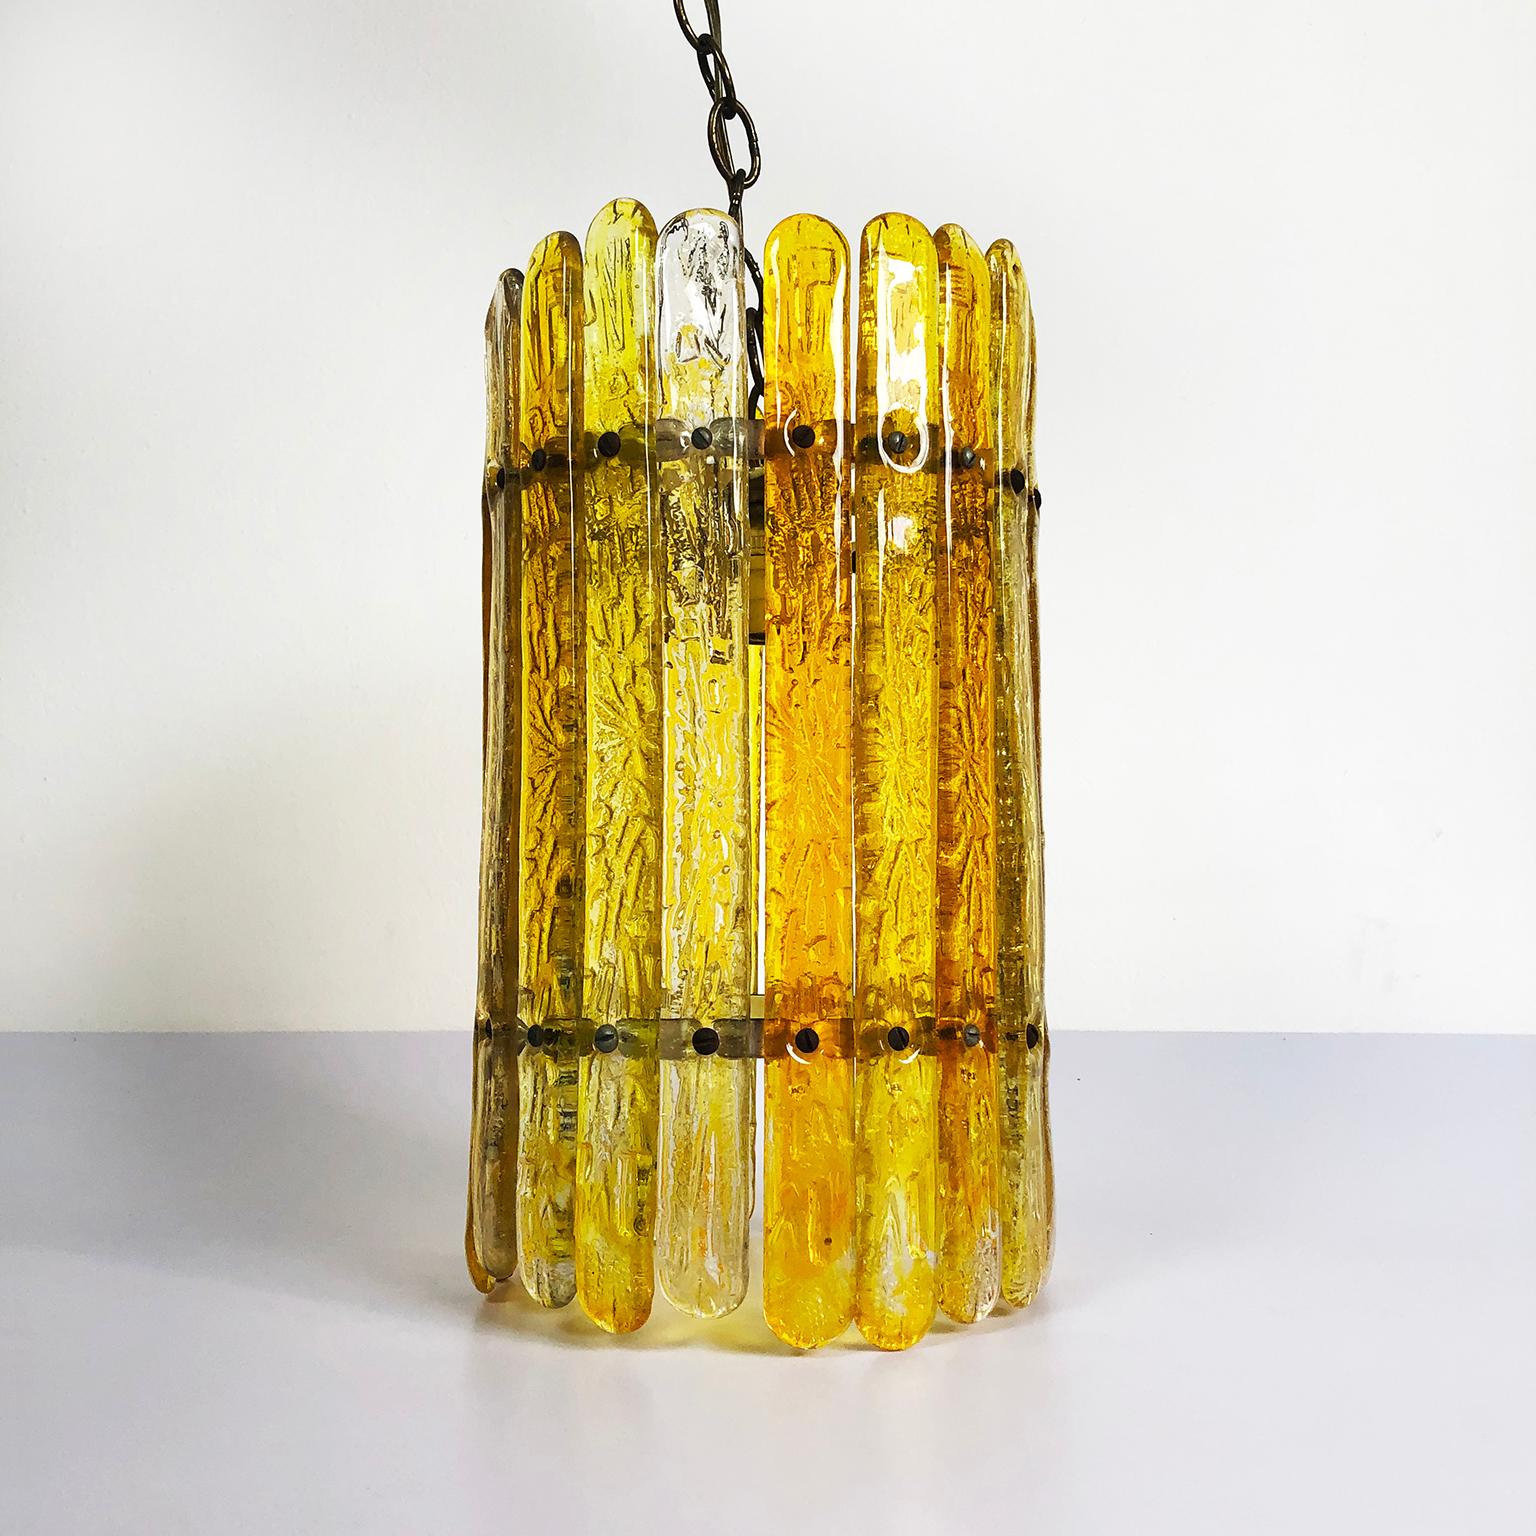 We offer this Feders Amber hand blown glass chandelier designed by Felipe Delfinger, Feders, Cuernavaca, Mexico. Using recycled glass, circa 1970.